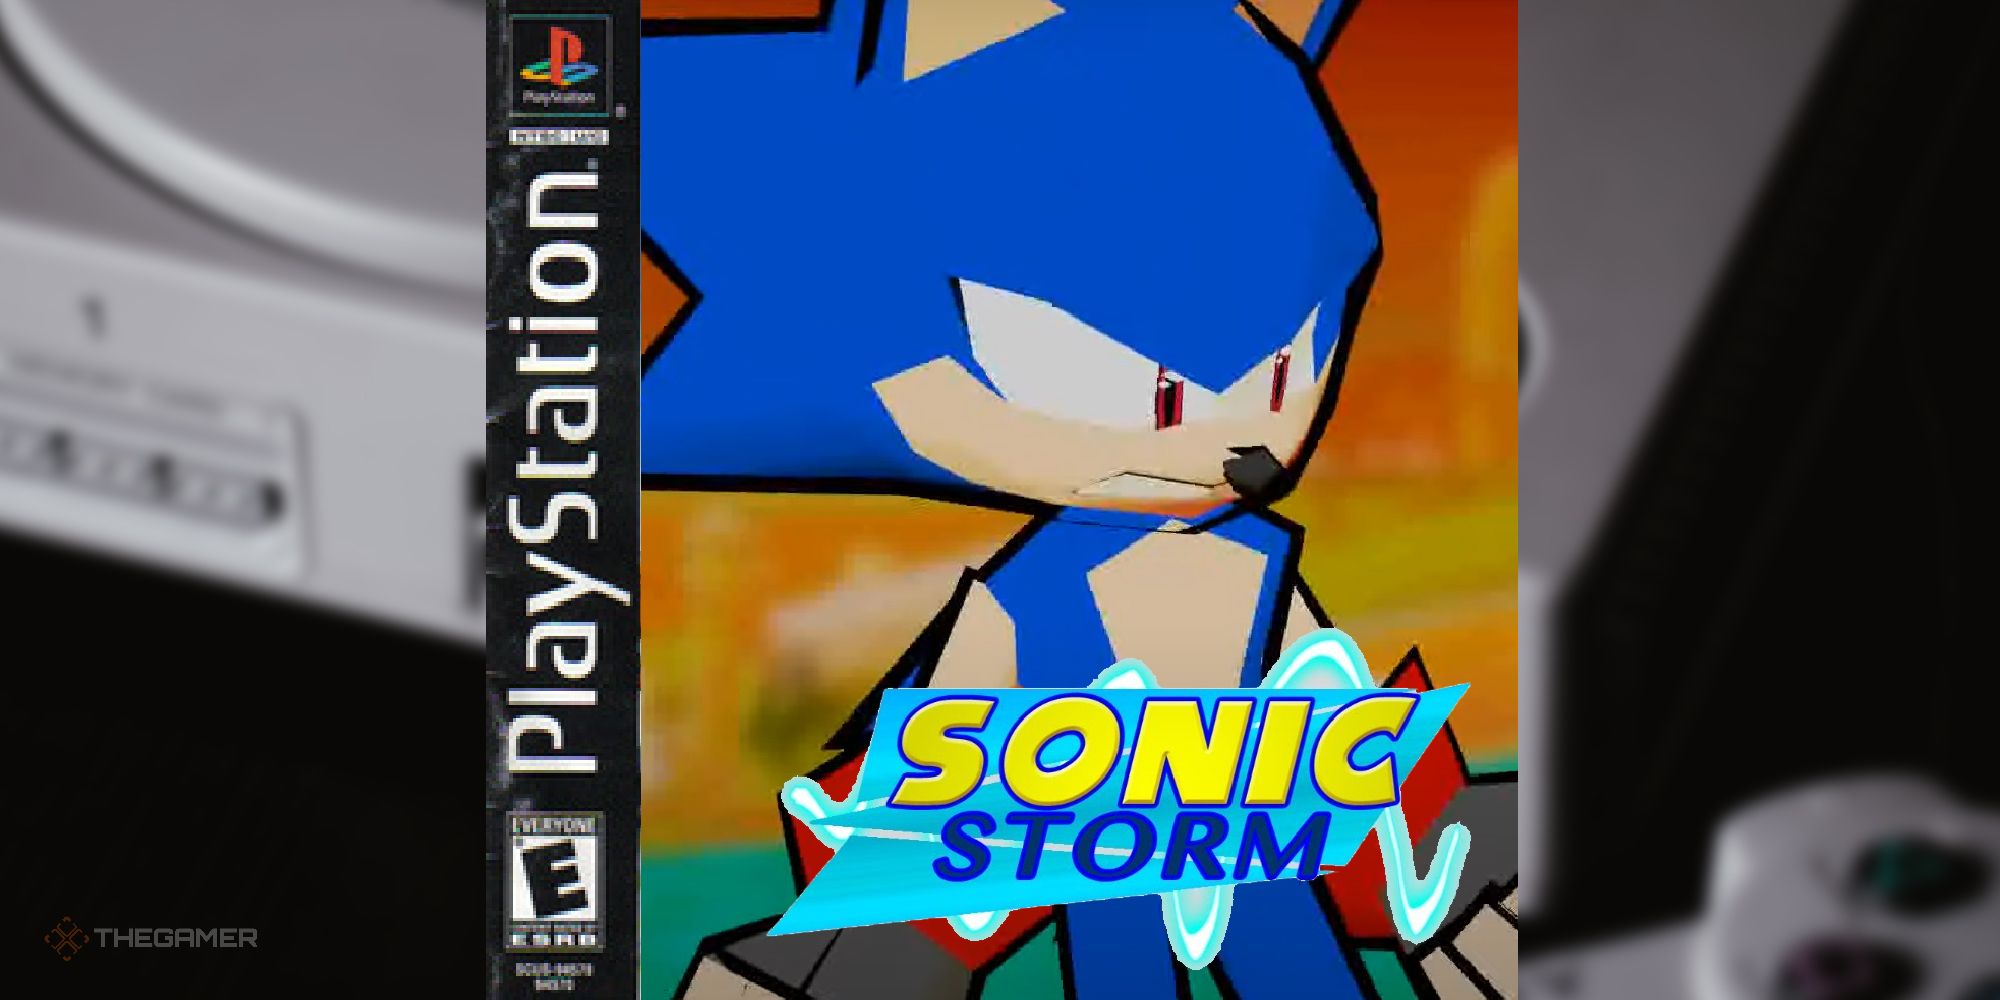 Sonic-Storm sonic looking grumpy on a ps1 game cover